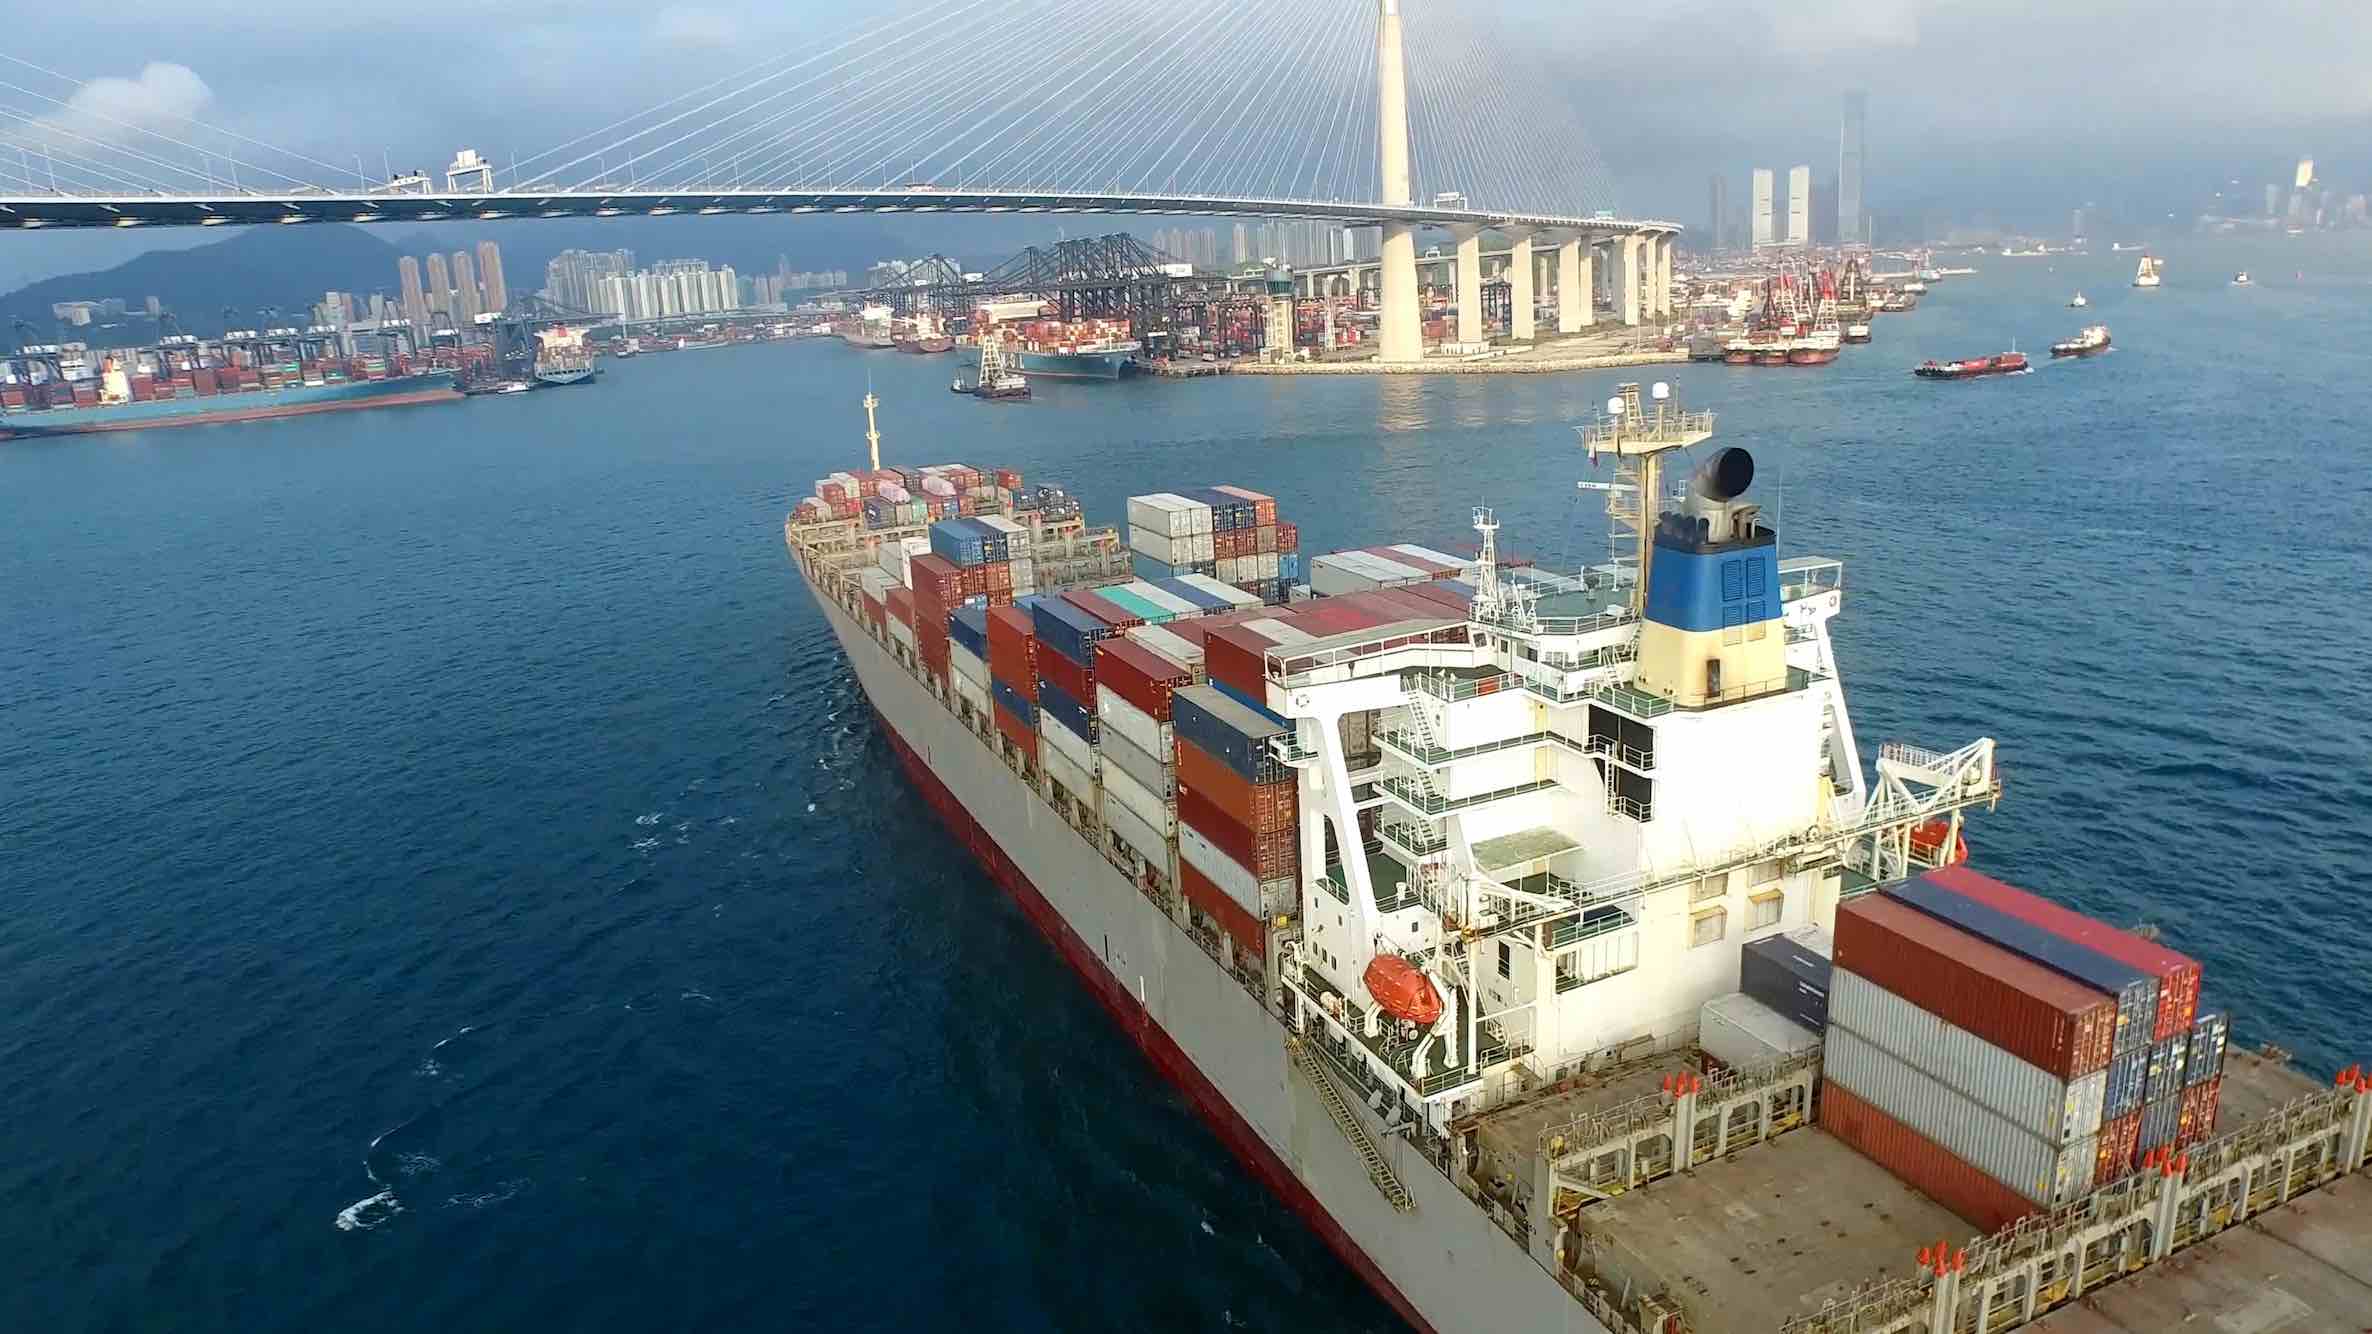 Aerial view of a loaded, white cargo ship that's about to dock in a busy city port. Straight ahead is a suspended bridge. Many others ships are nearby. 